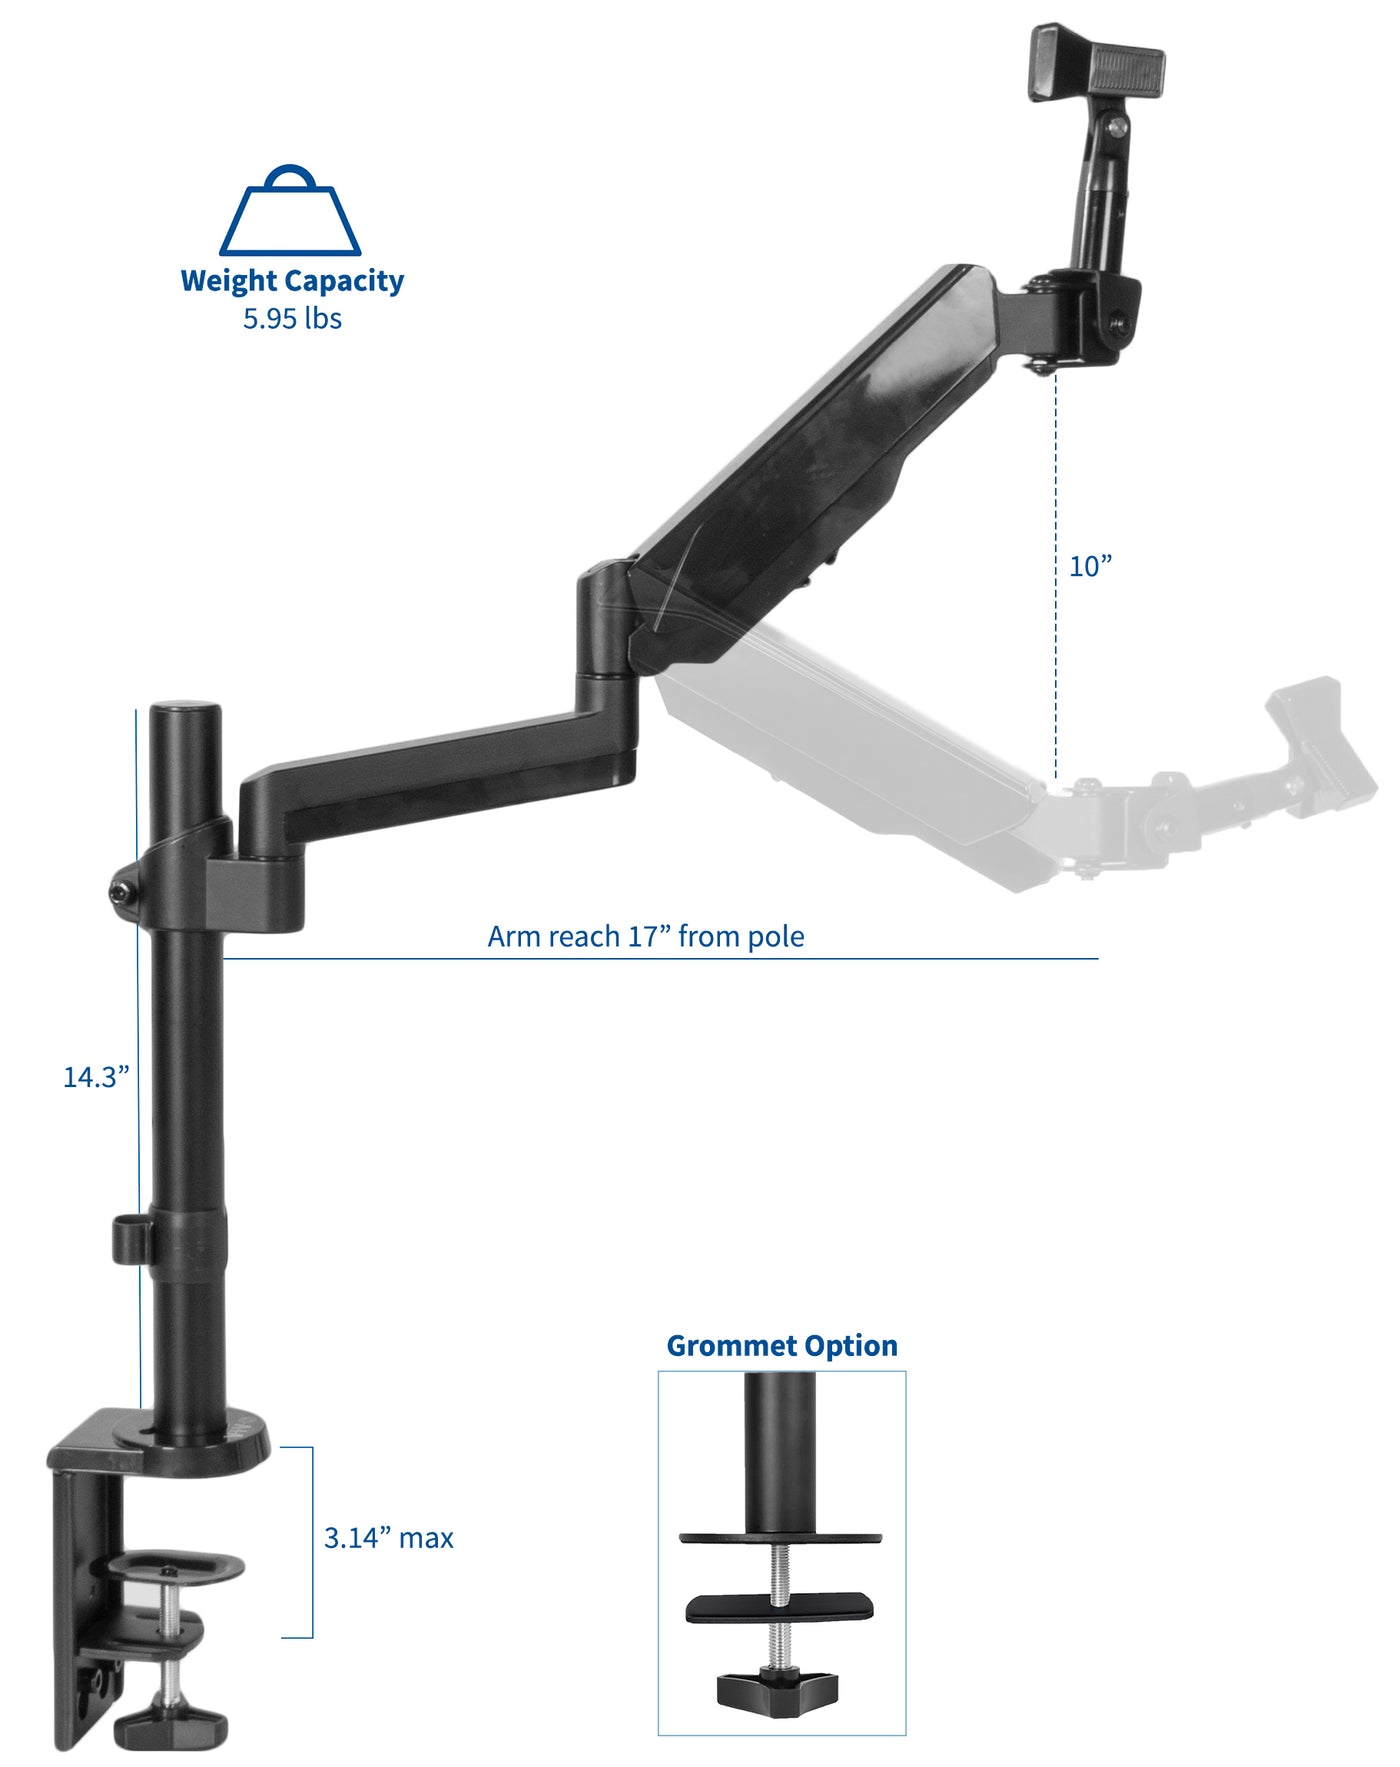 Adjustable microphone mount from VIVO.